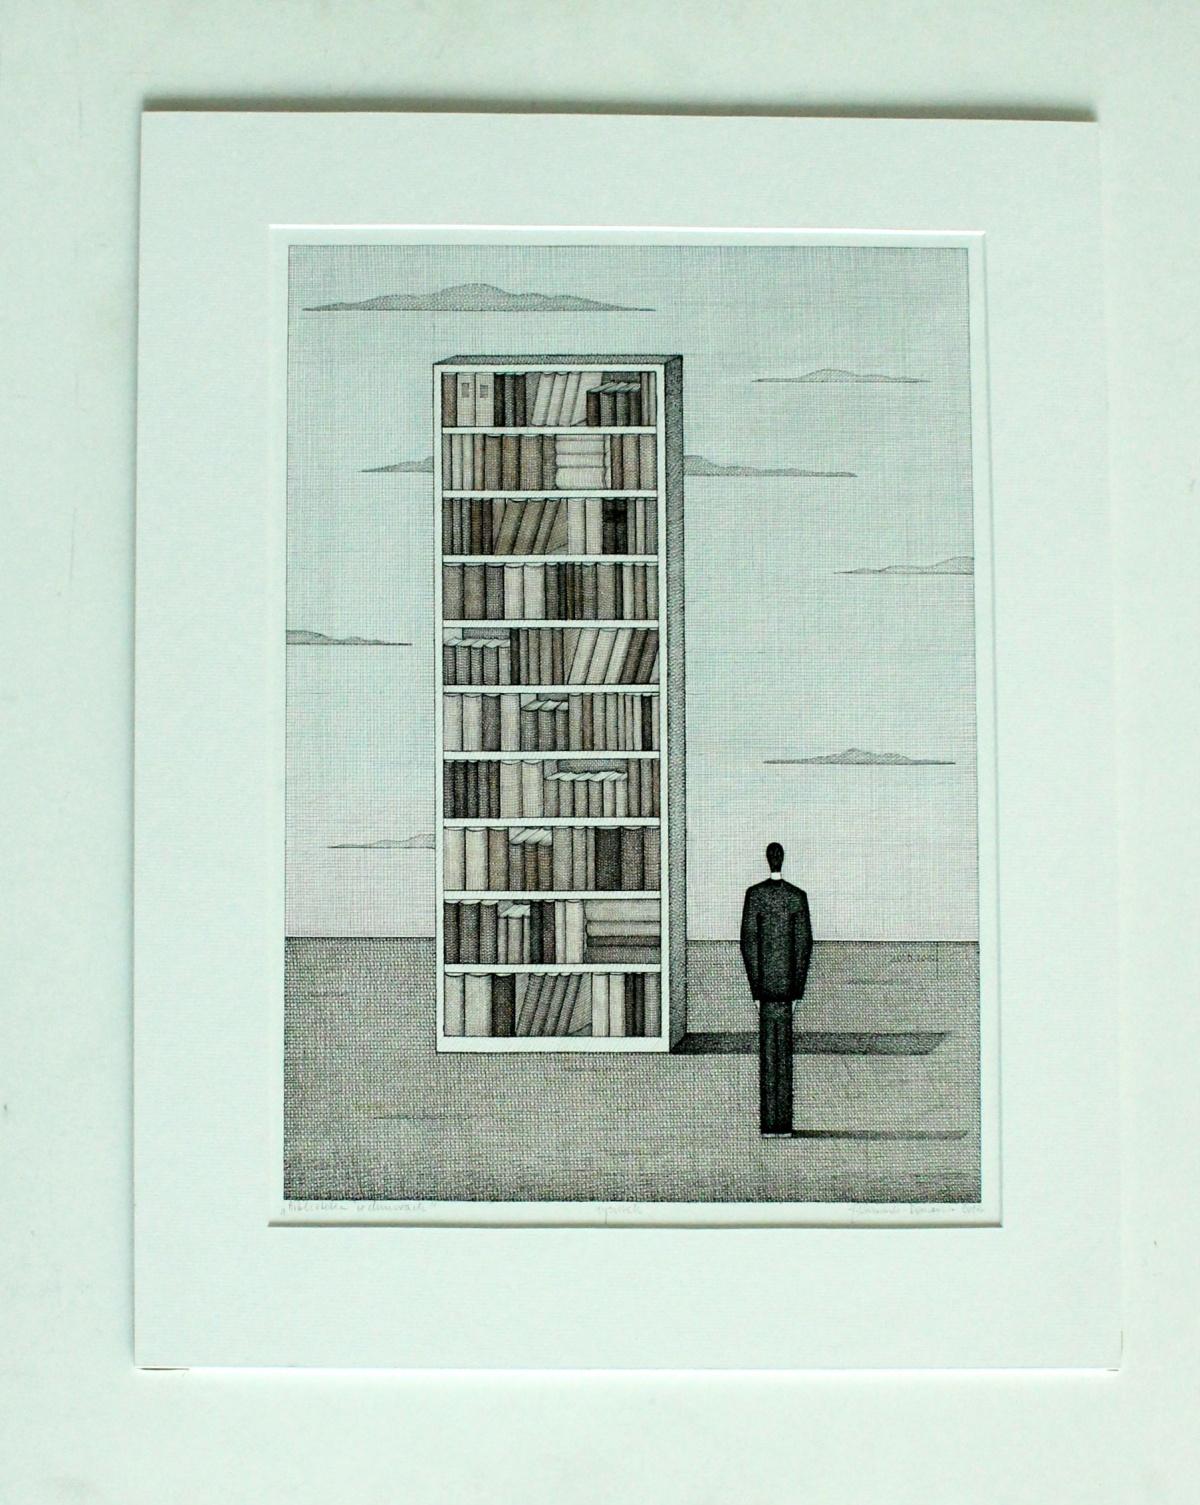 Library in the clouds - XXI century contemporary figurative drawing, Surreal - Art by Joanna Wiszniewska-Domanska